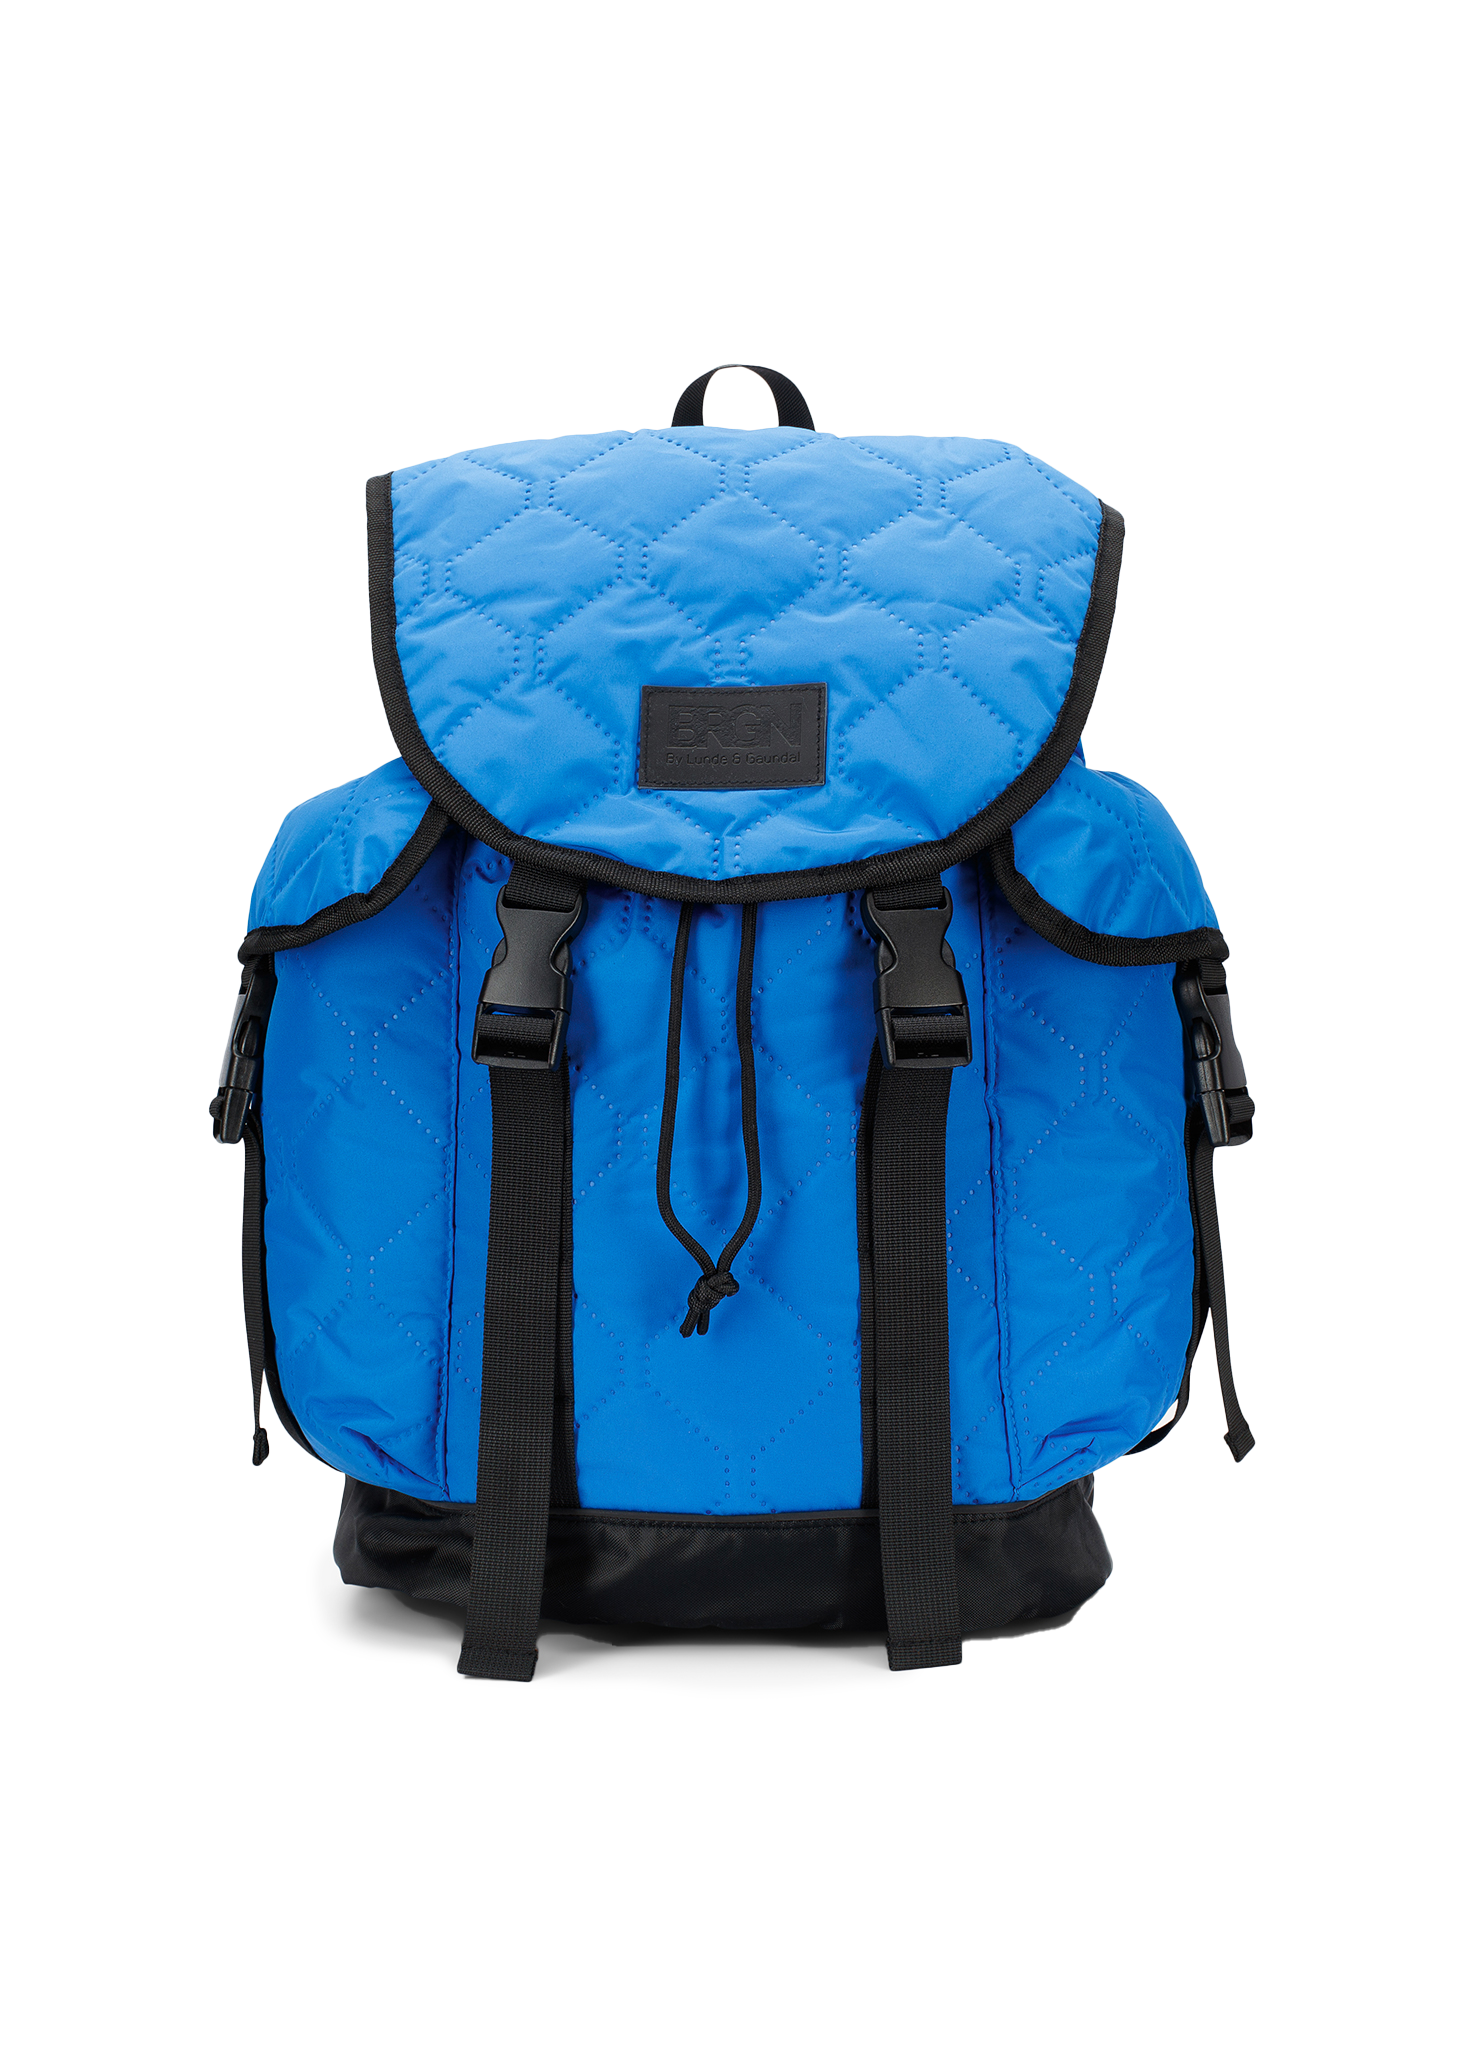 BRGN by Lunde & Gaundal Quilted Frost Backpack Accessories 745 Palace Blue